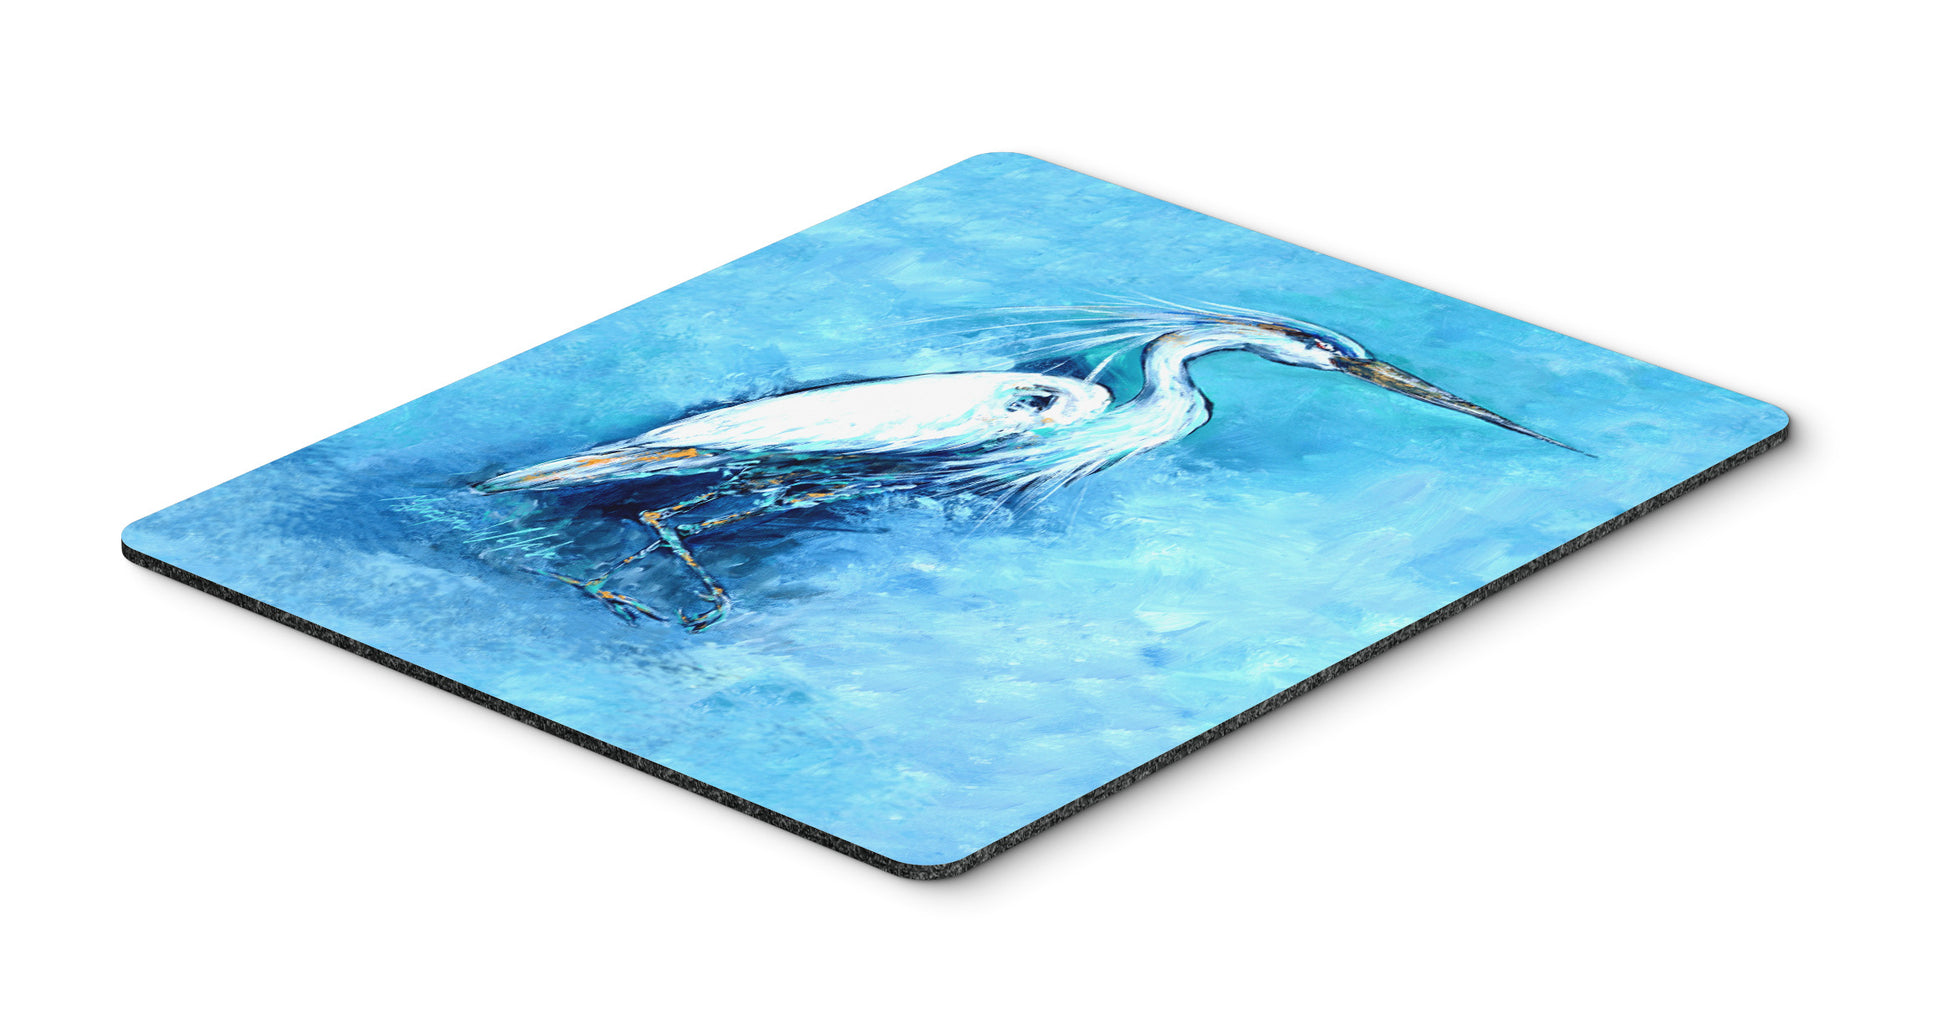 Buy this Standing Gaurd Egret Mouse Pad, Hot Pad or Trivet